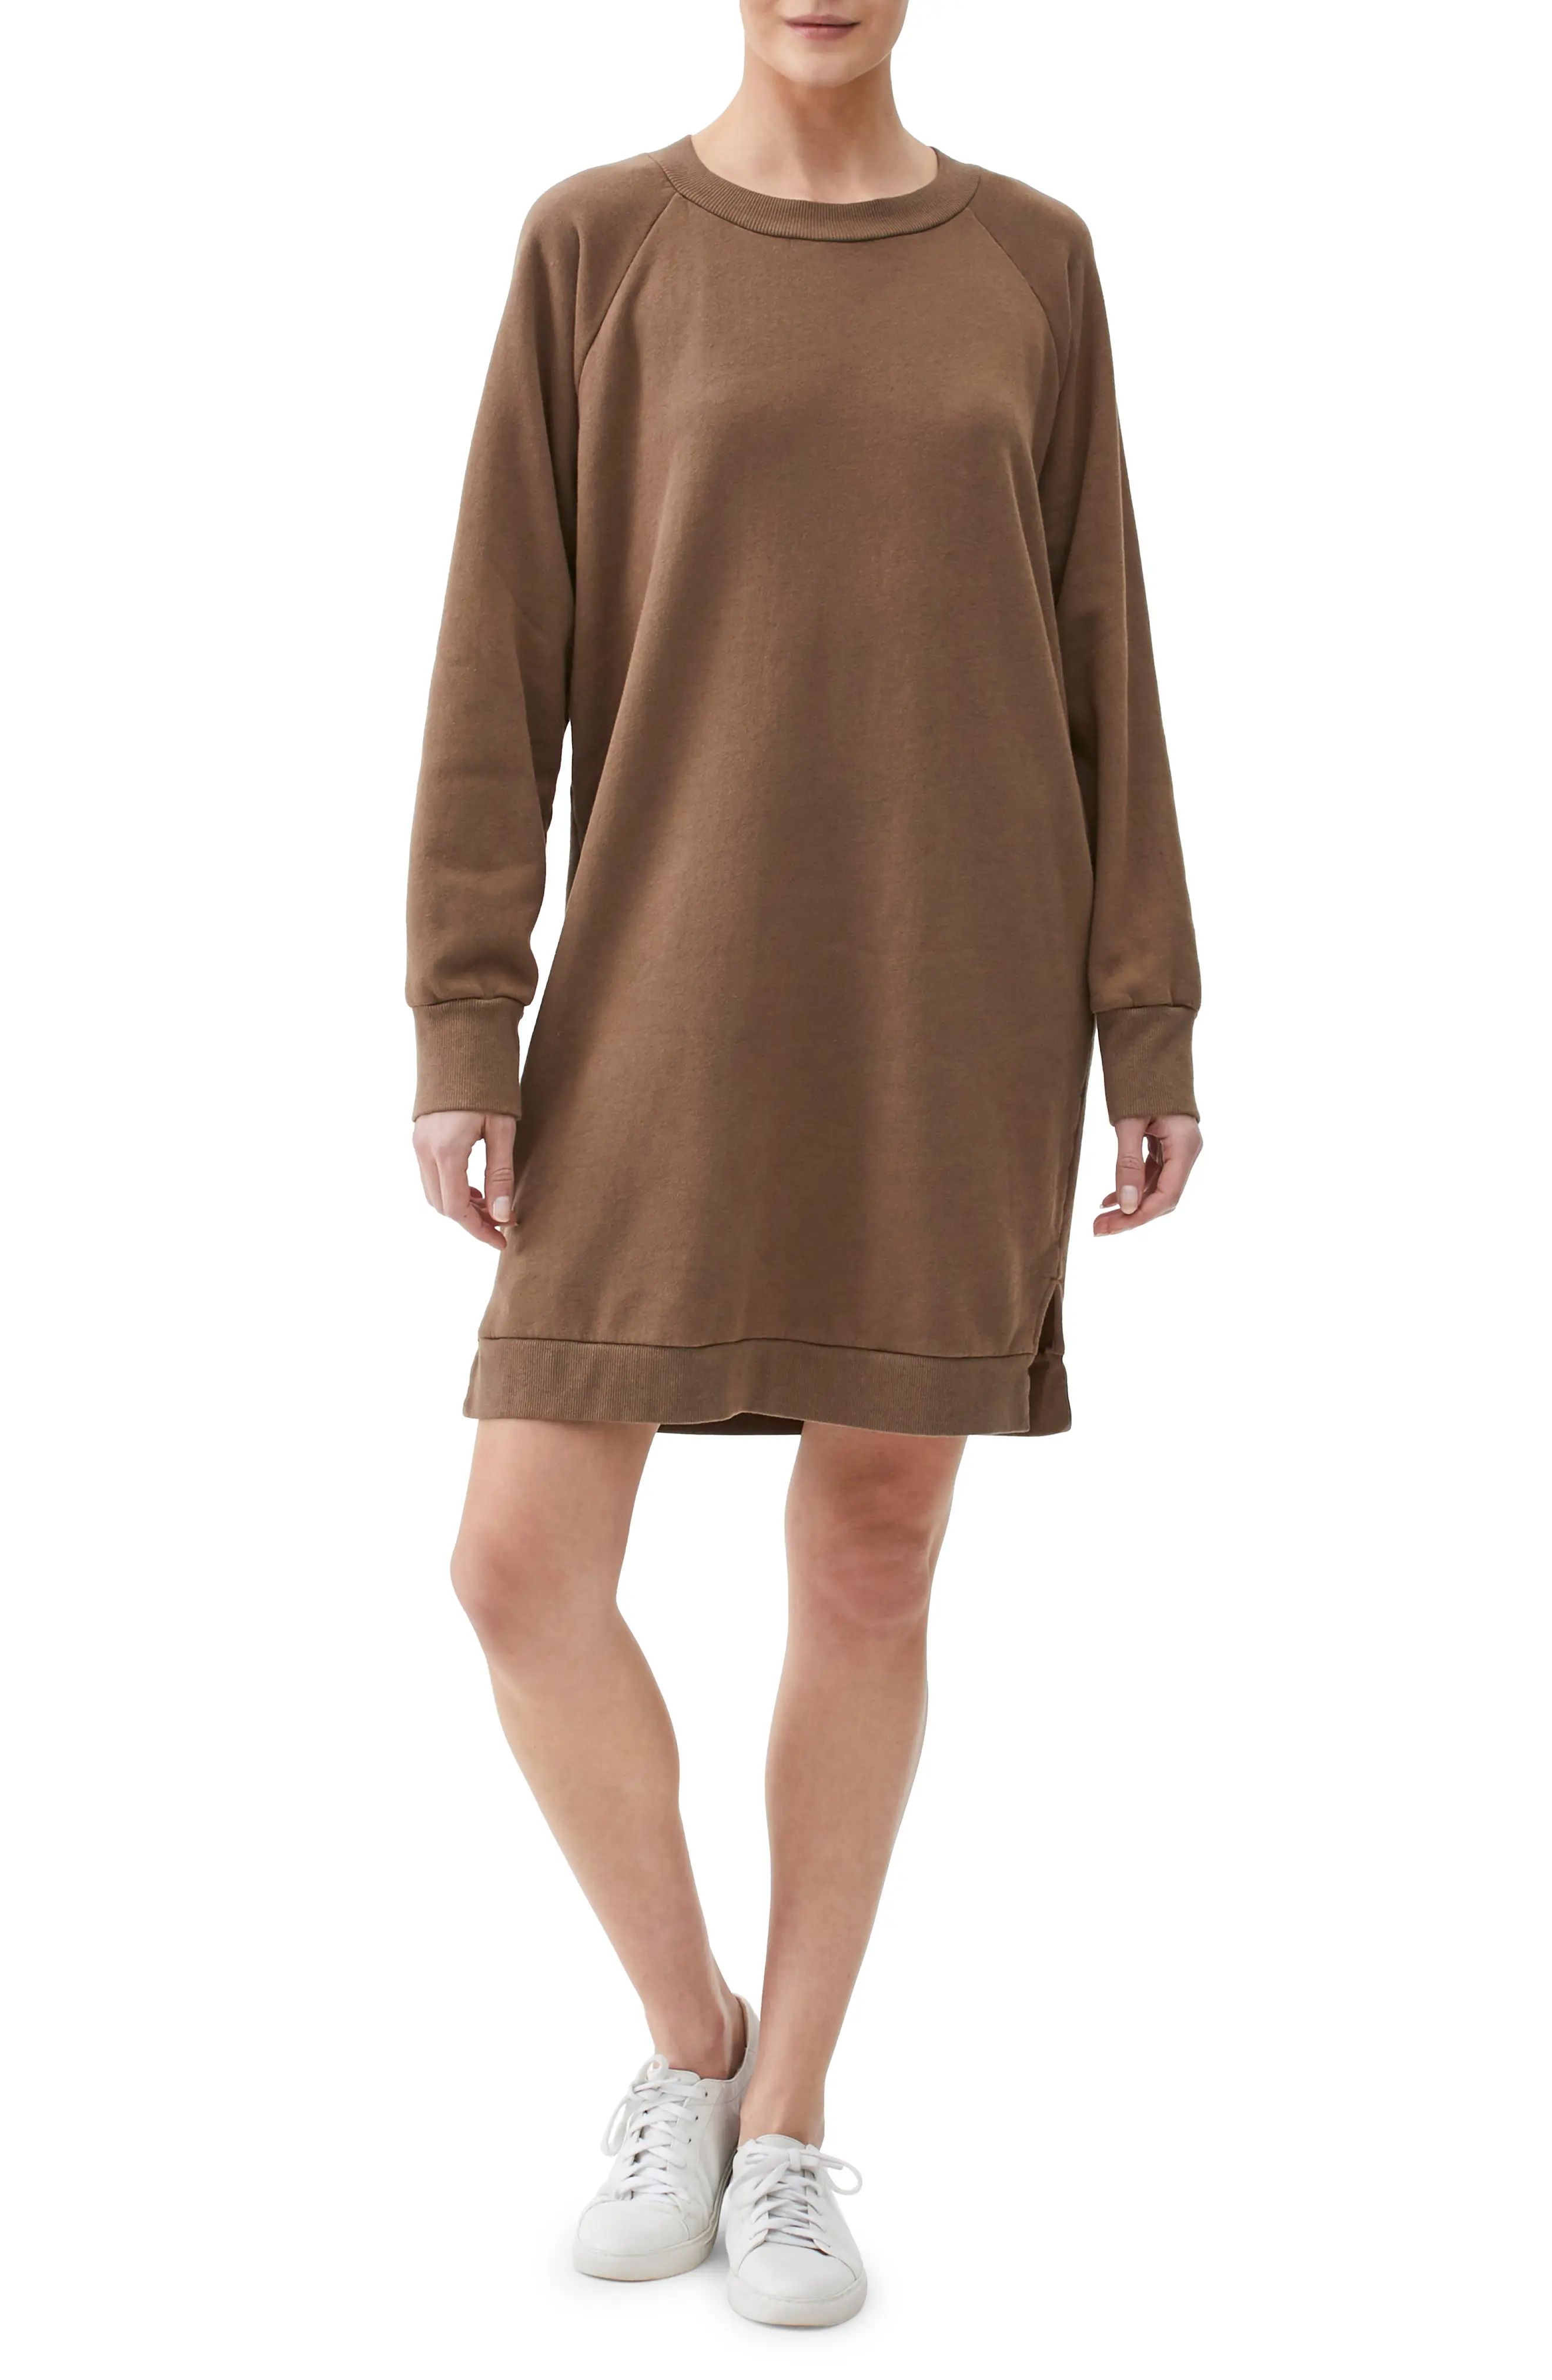 Michael Stars Lolly Balloon Sleeve Sweatshirt Dress in Woodchip at Nordstrom, Size X-Small | Nordstrom